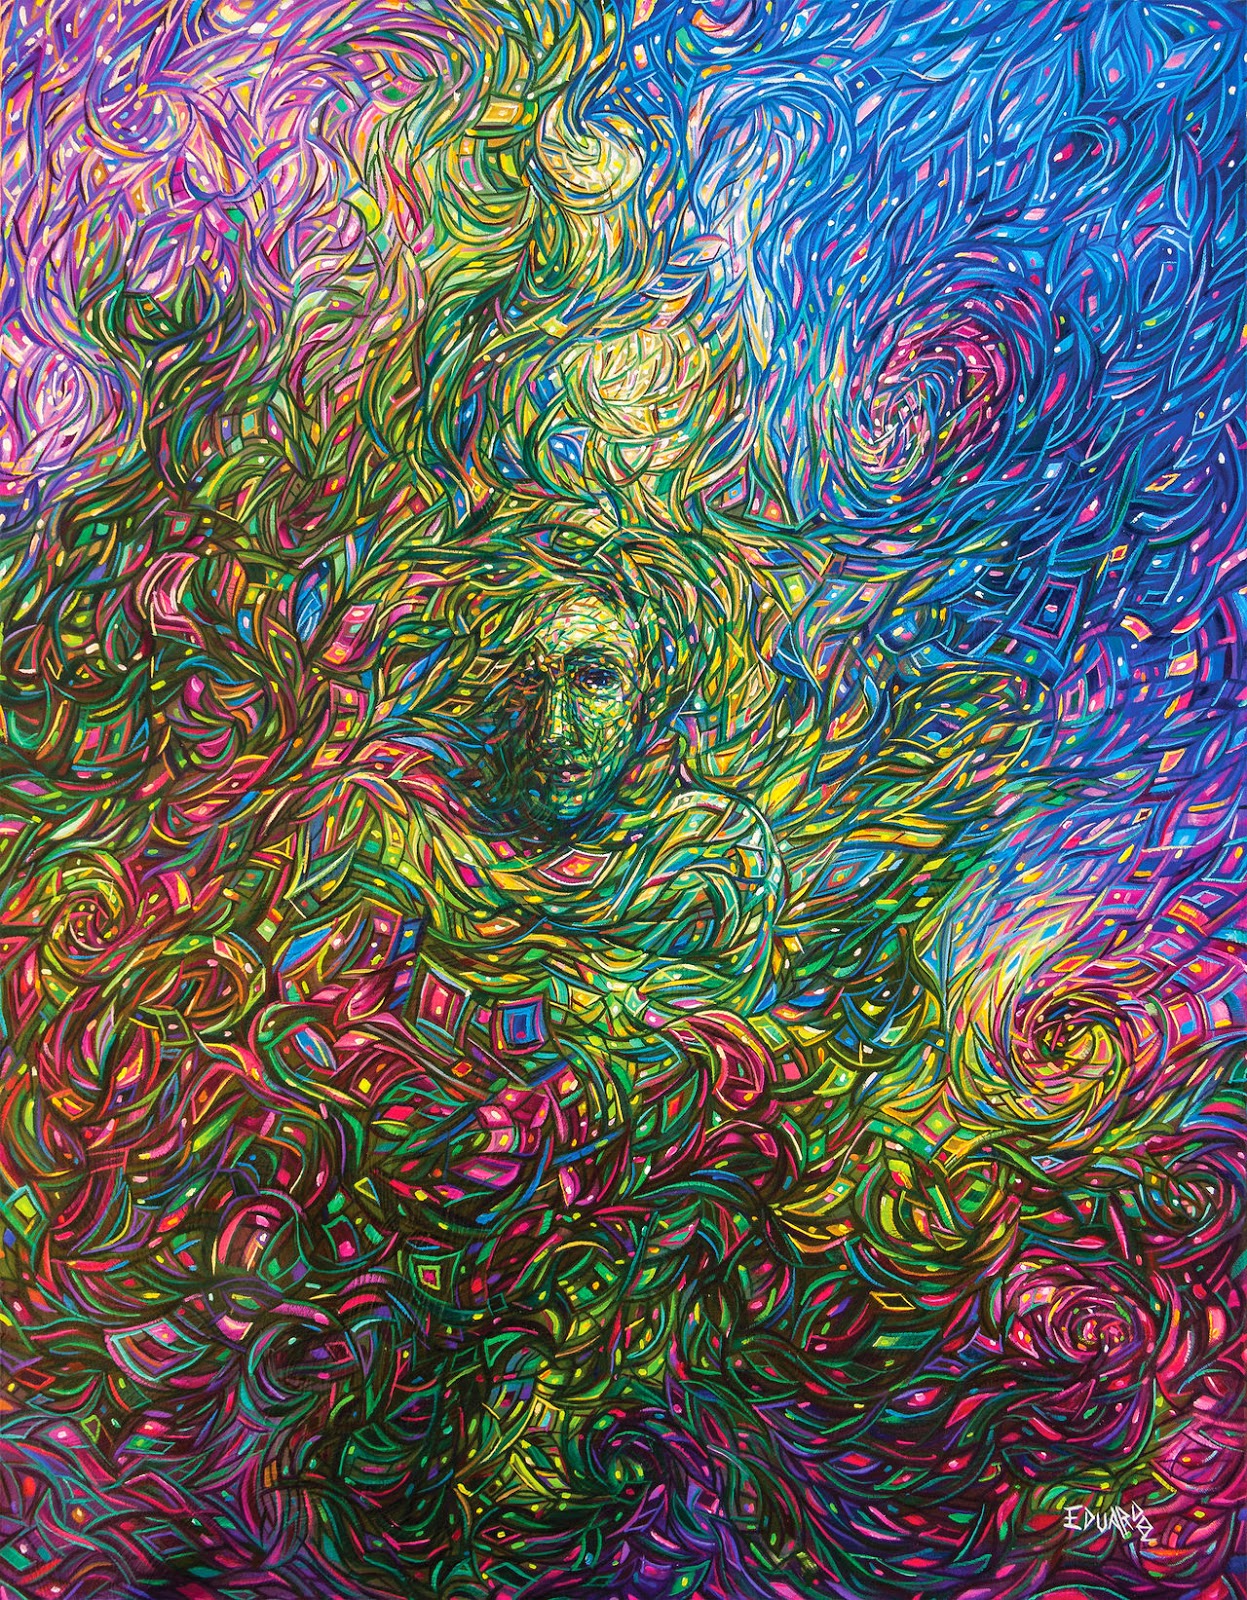 15-States-of-Consciousness-Eduardo-R-Calzado-Paintings-in-Swirls-of-Colour-www-designstack-co